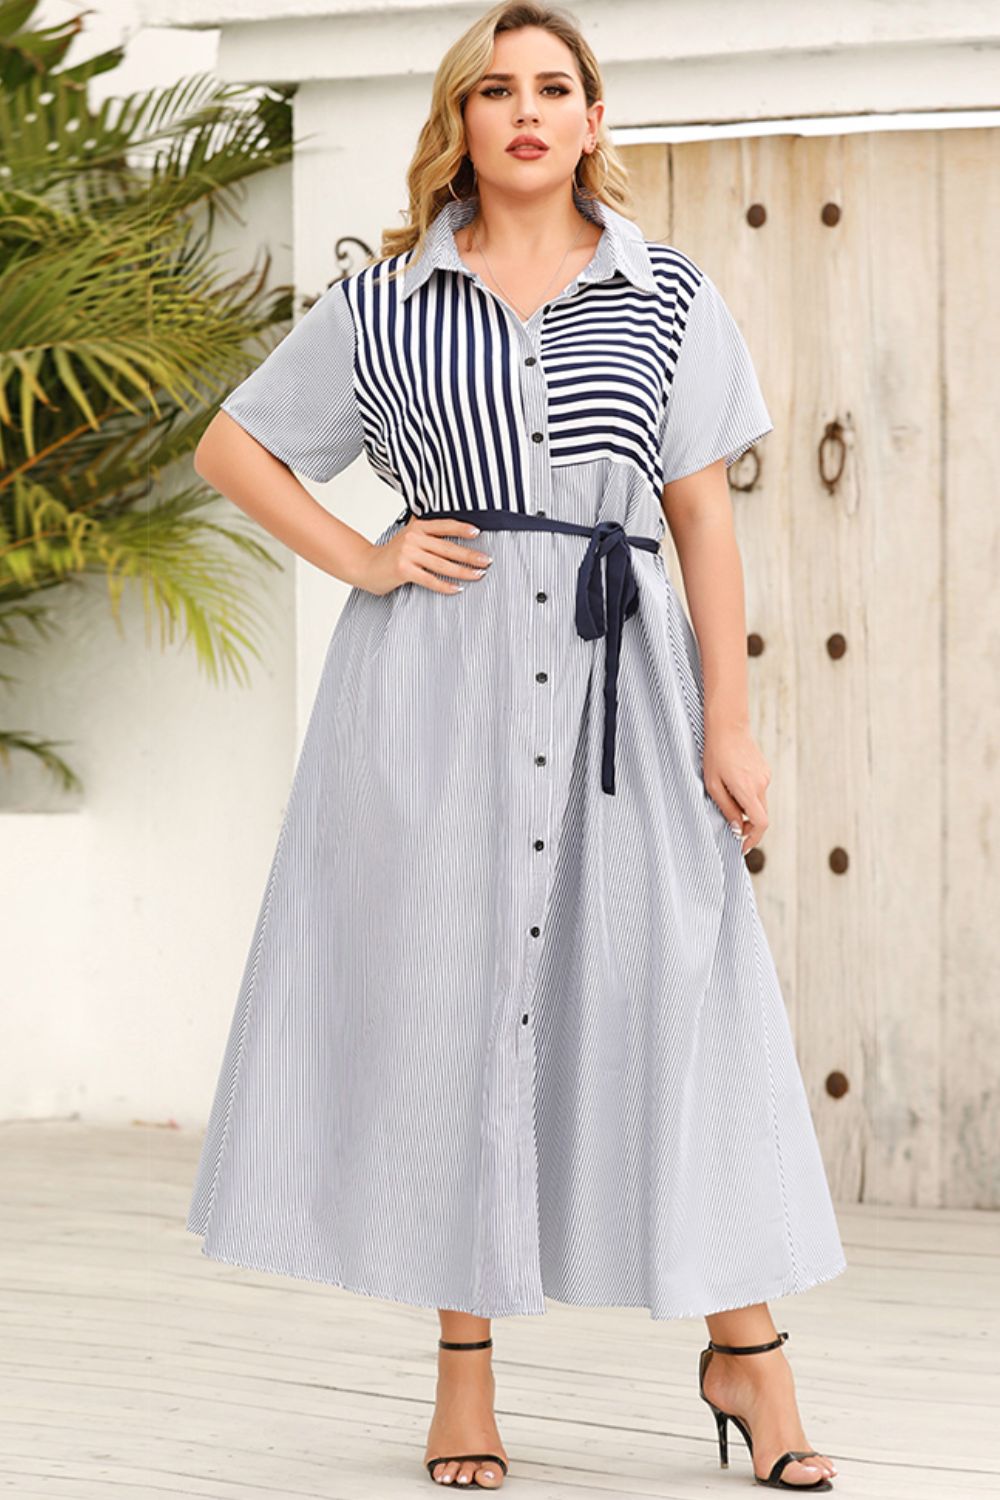 Elegant Plus Size Striped Belted Button-Up Shirt Dress - Perfect Beach Wedding Guest Outfit, Stylish and Comfortable for Any Summer Event